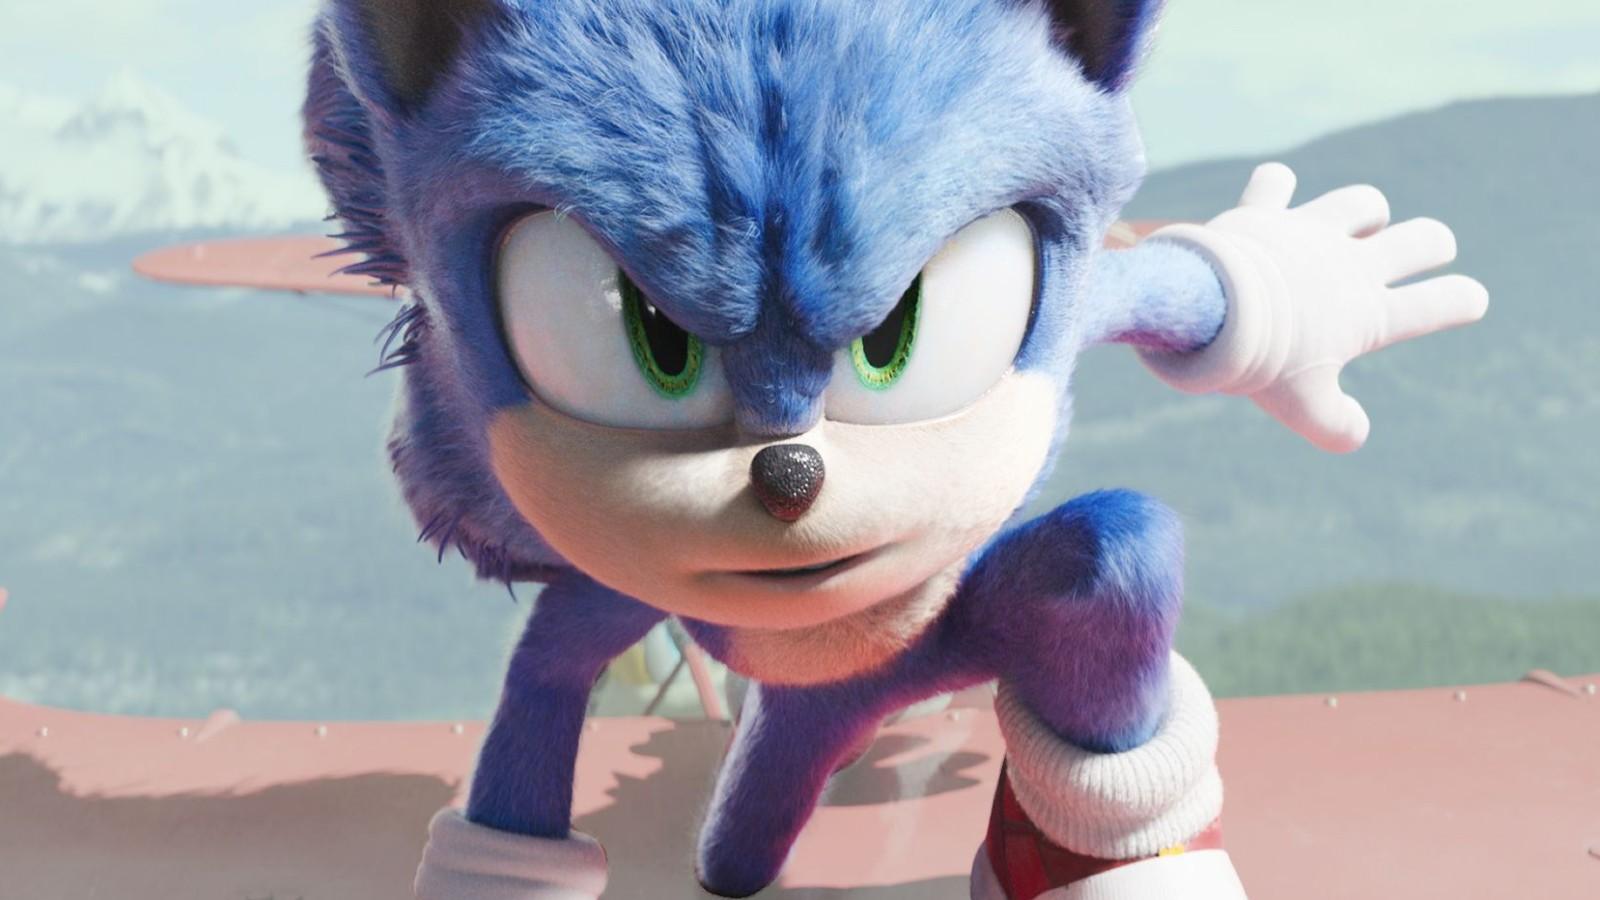 A still of Sonic the Hedgehog